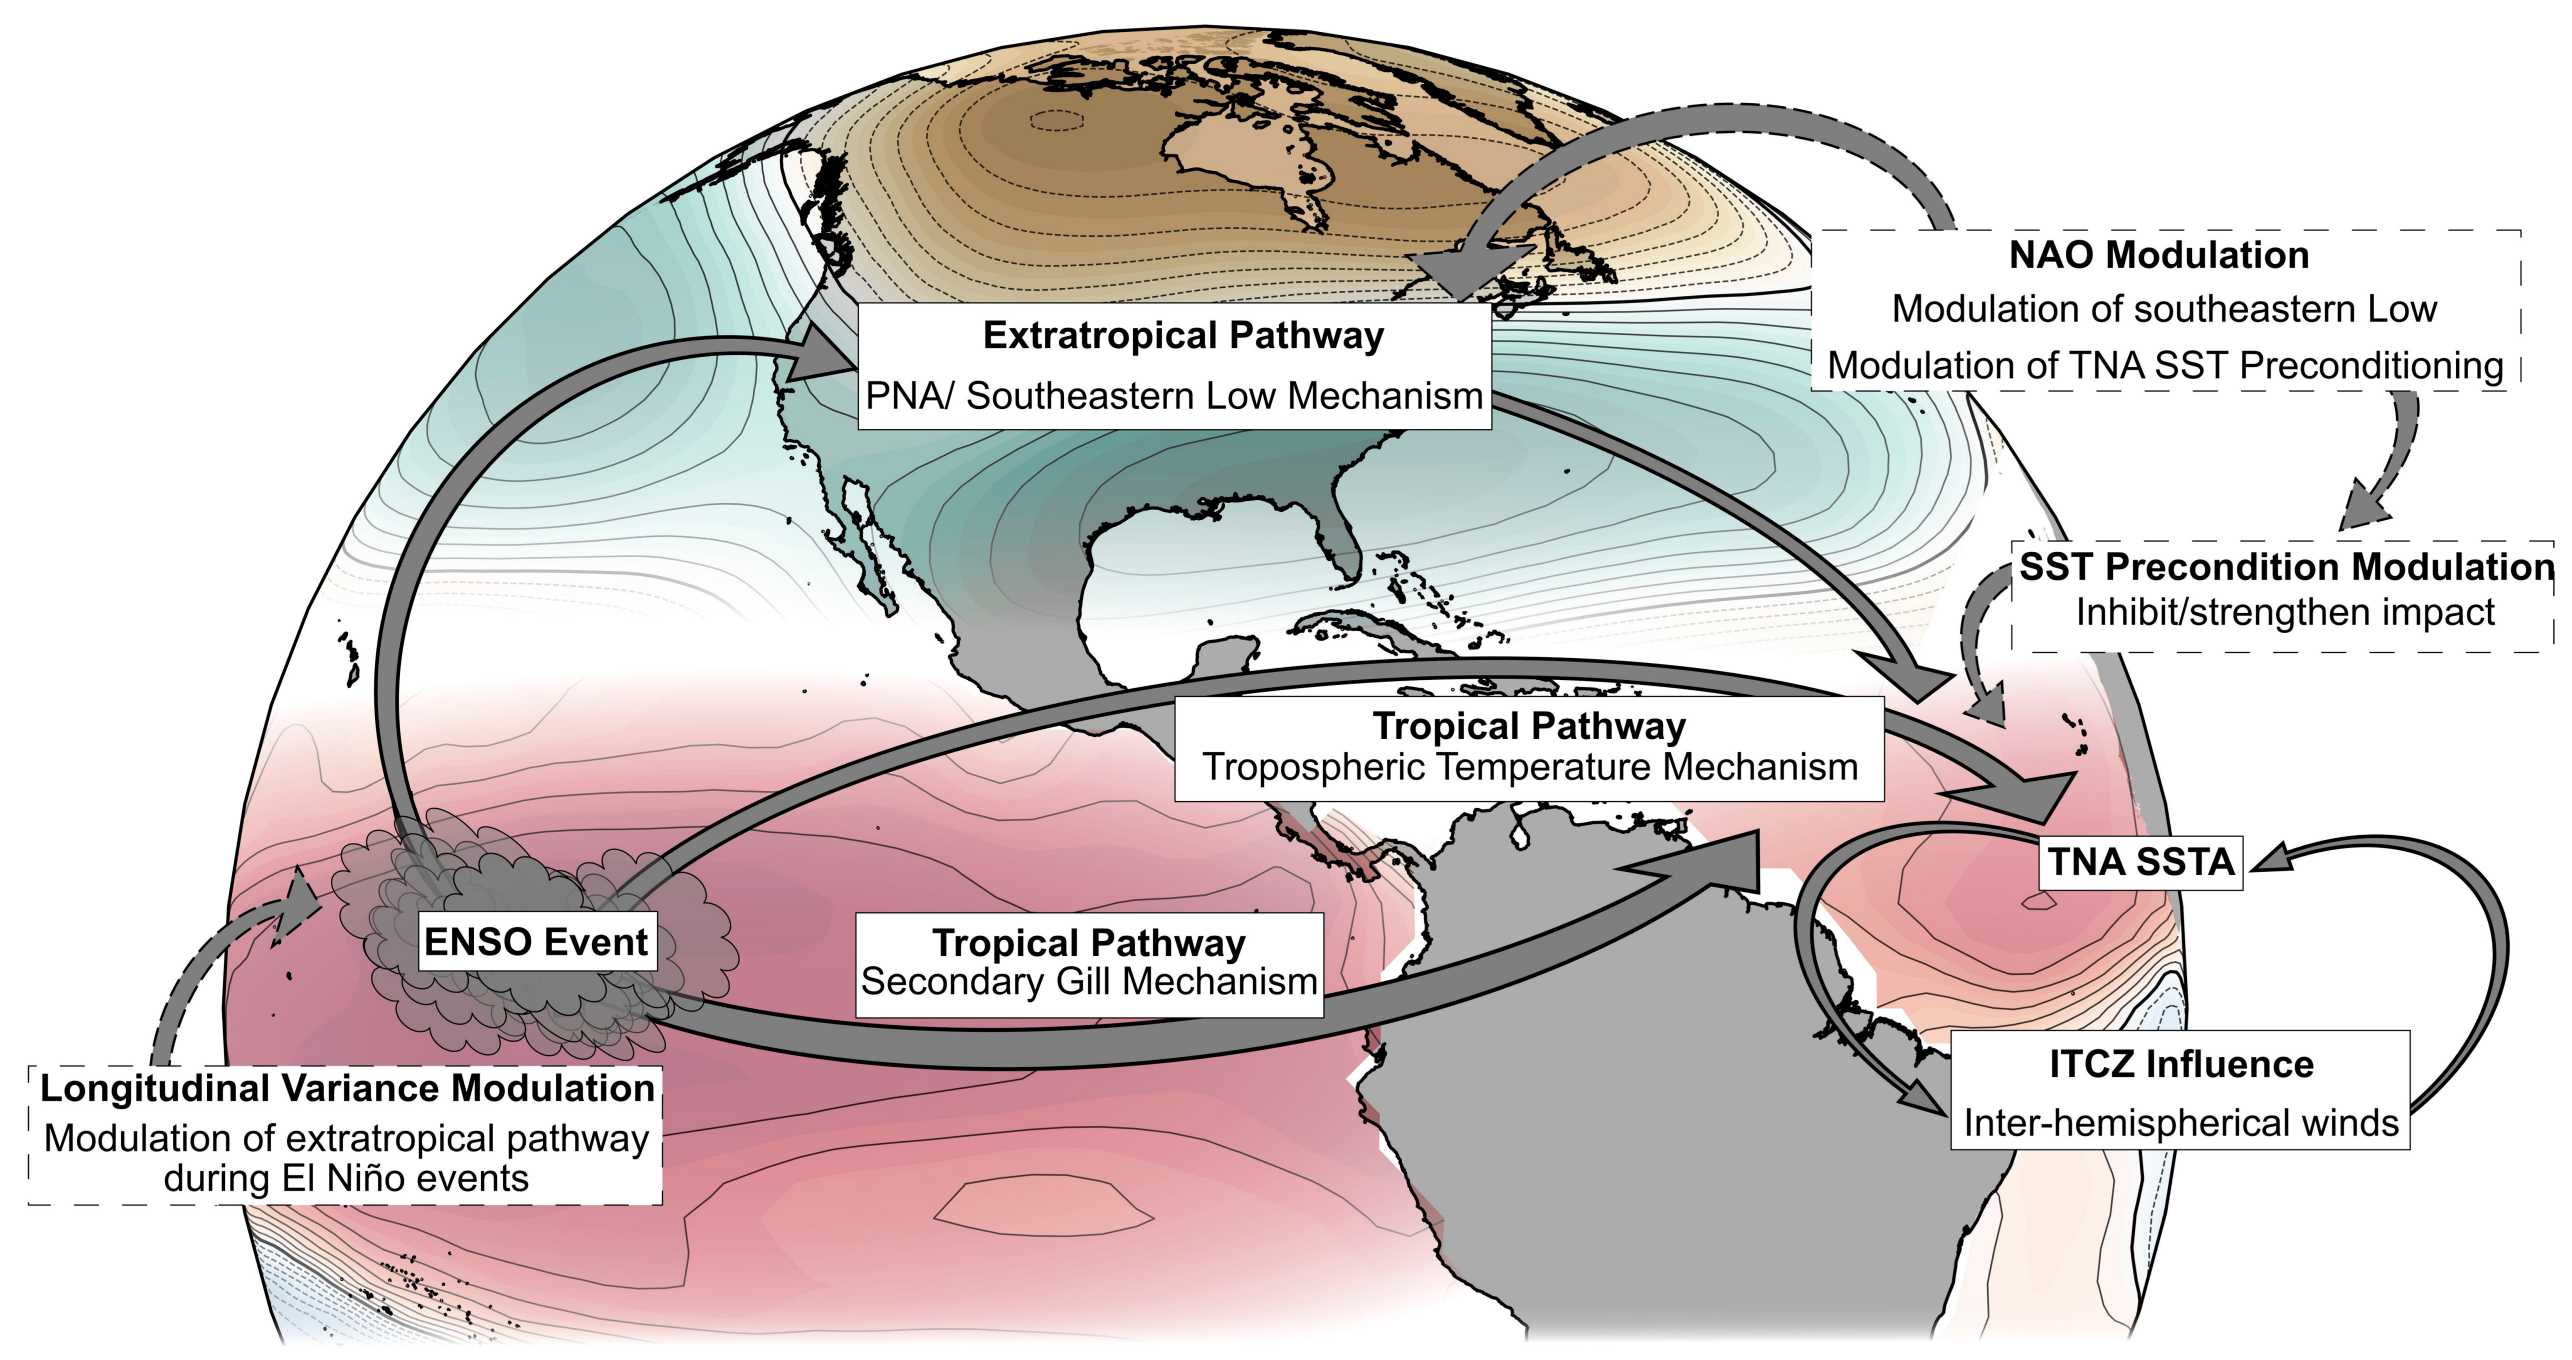 Schematic of main mechanisms for the ENSO teleconnection towards the tropical Atlantic. Dashed arrows and boxes represent modulating factors, while solid arrows and boxes represent the main mechanisms for the teleconnection.